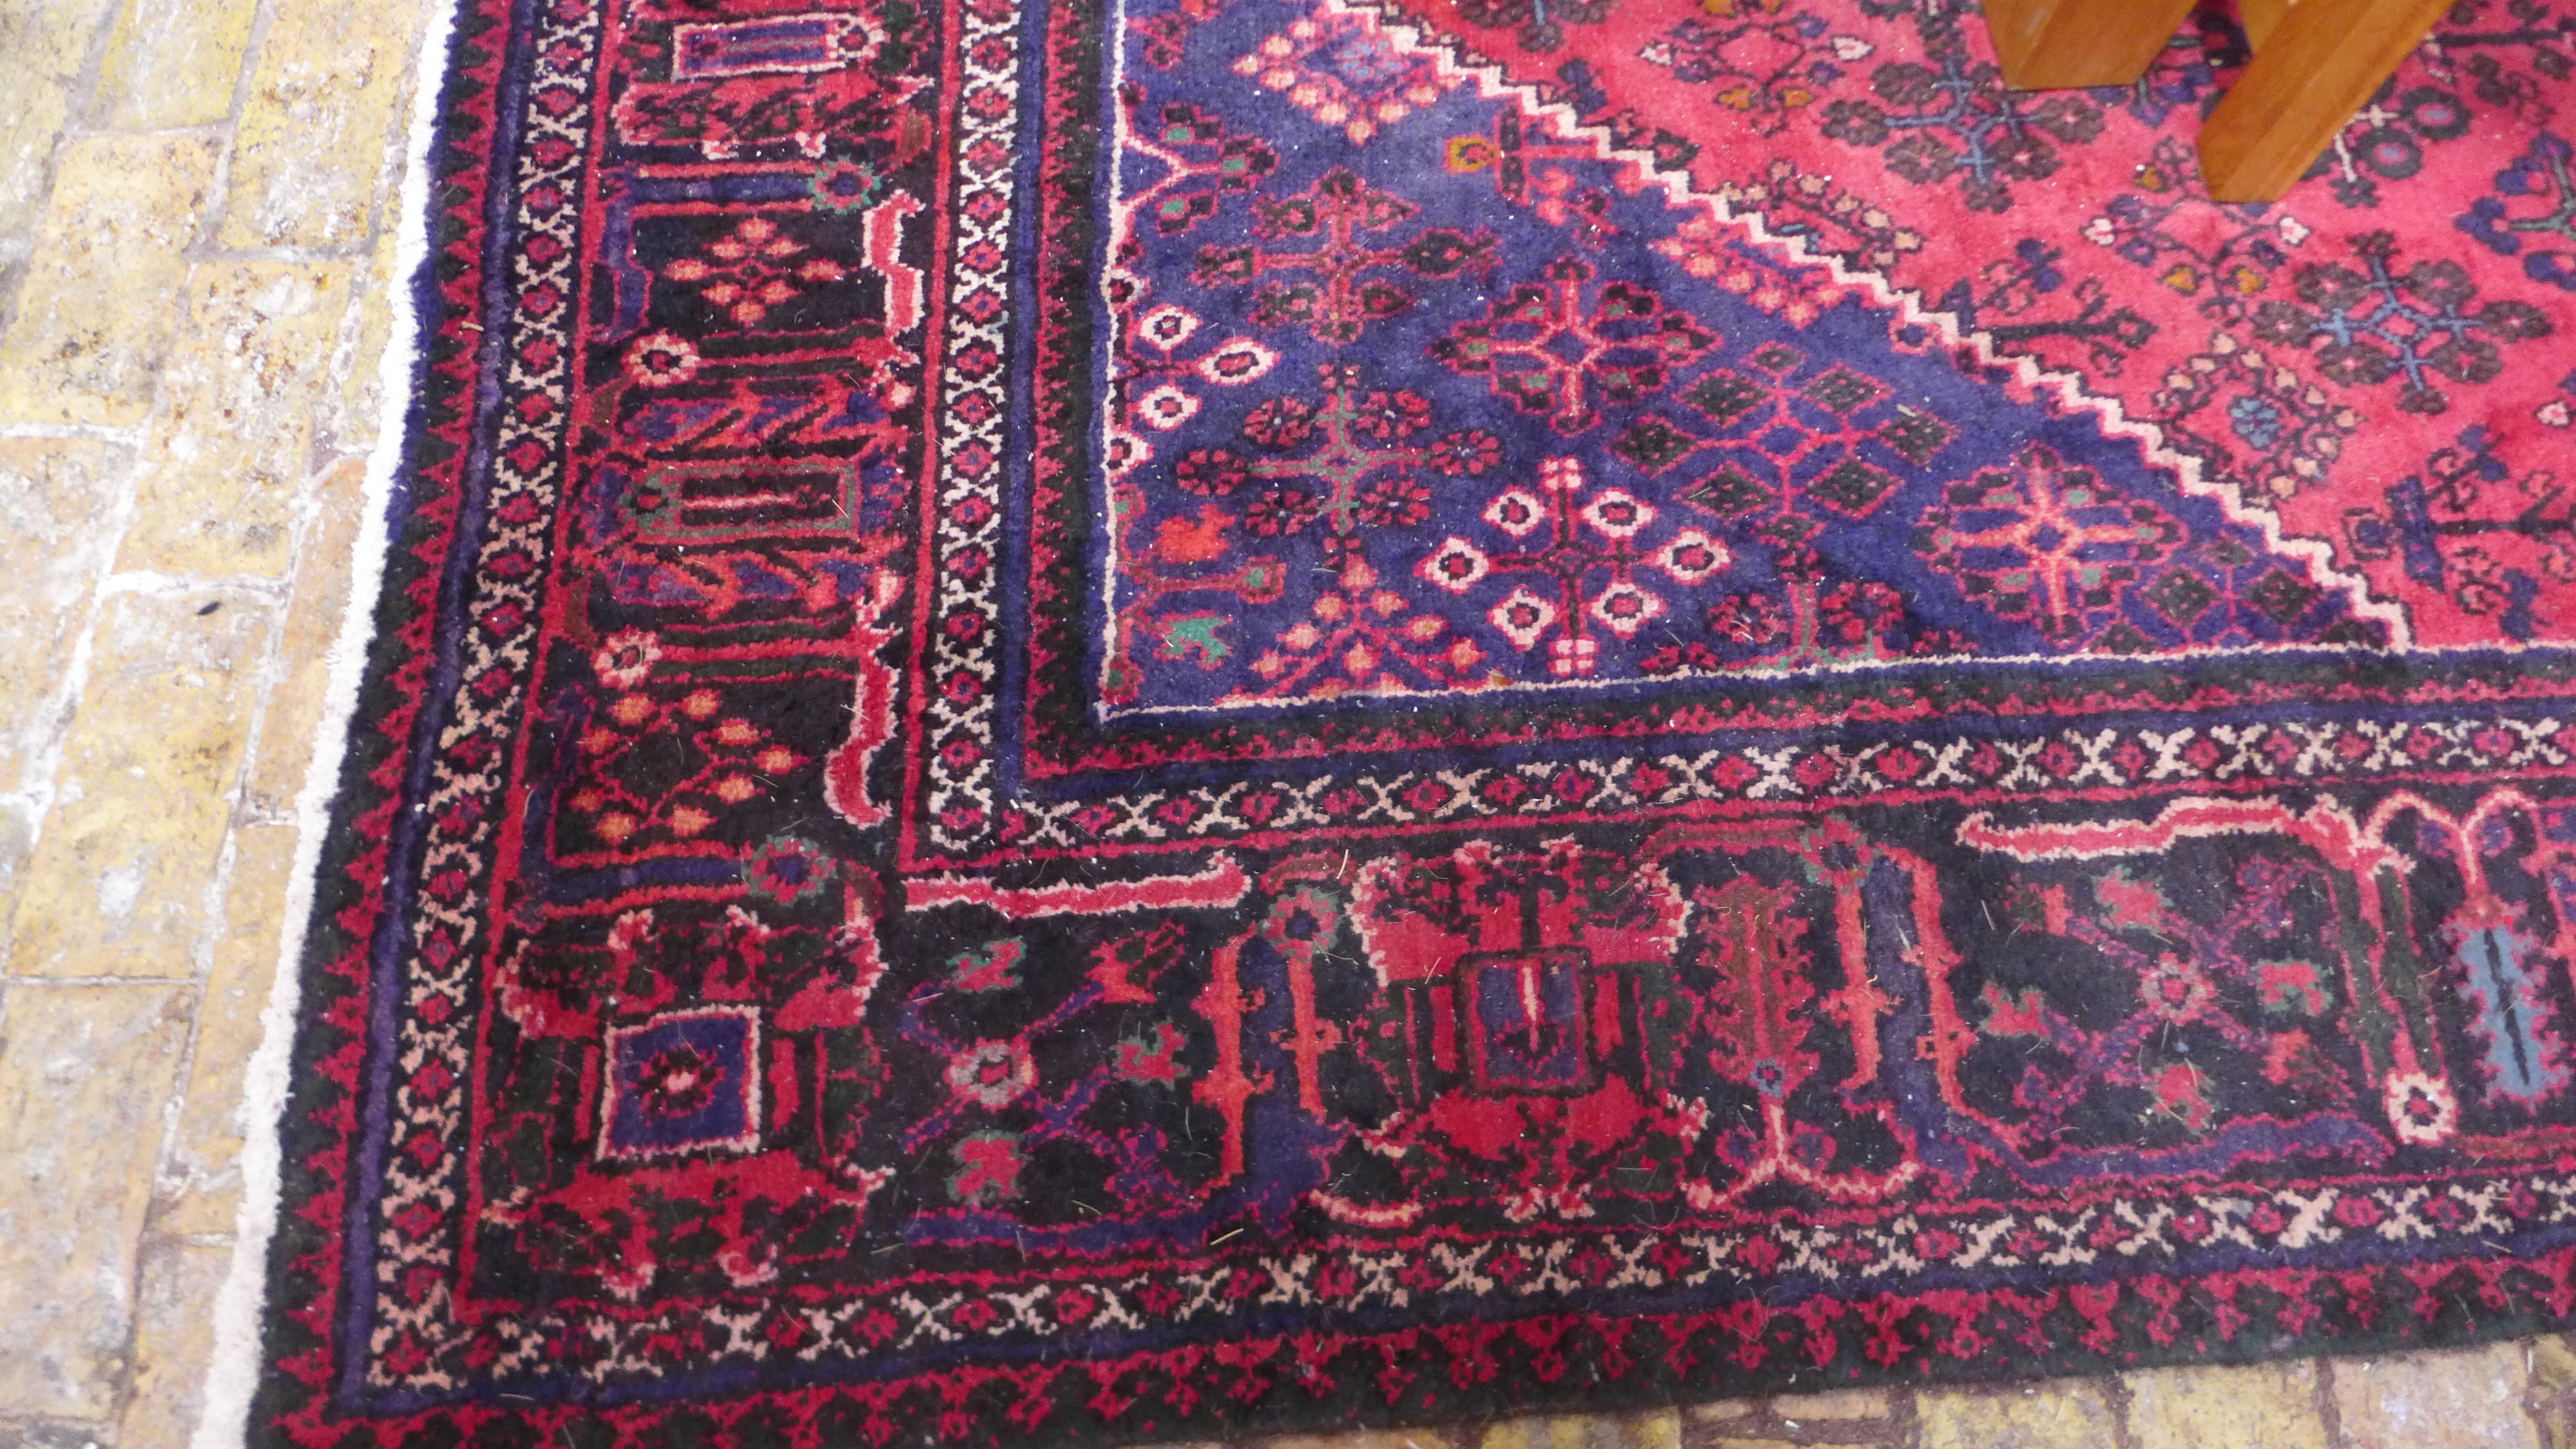 A large woolen hand knotted rug - 398cm x 240cm